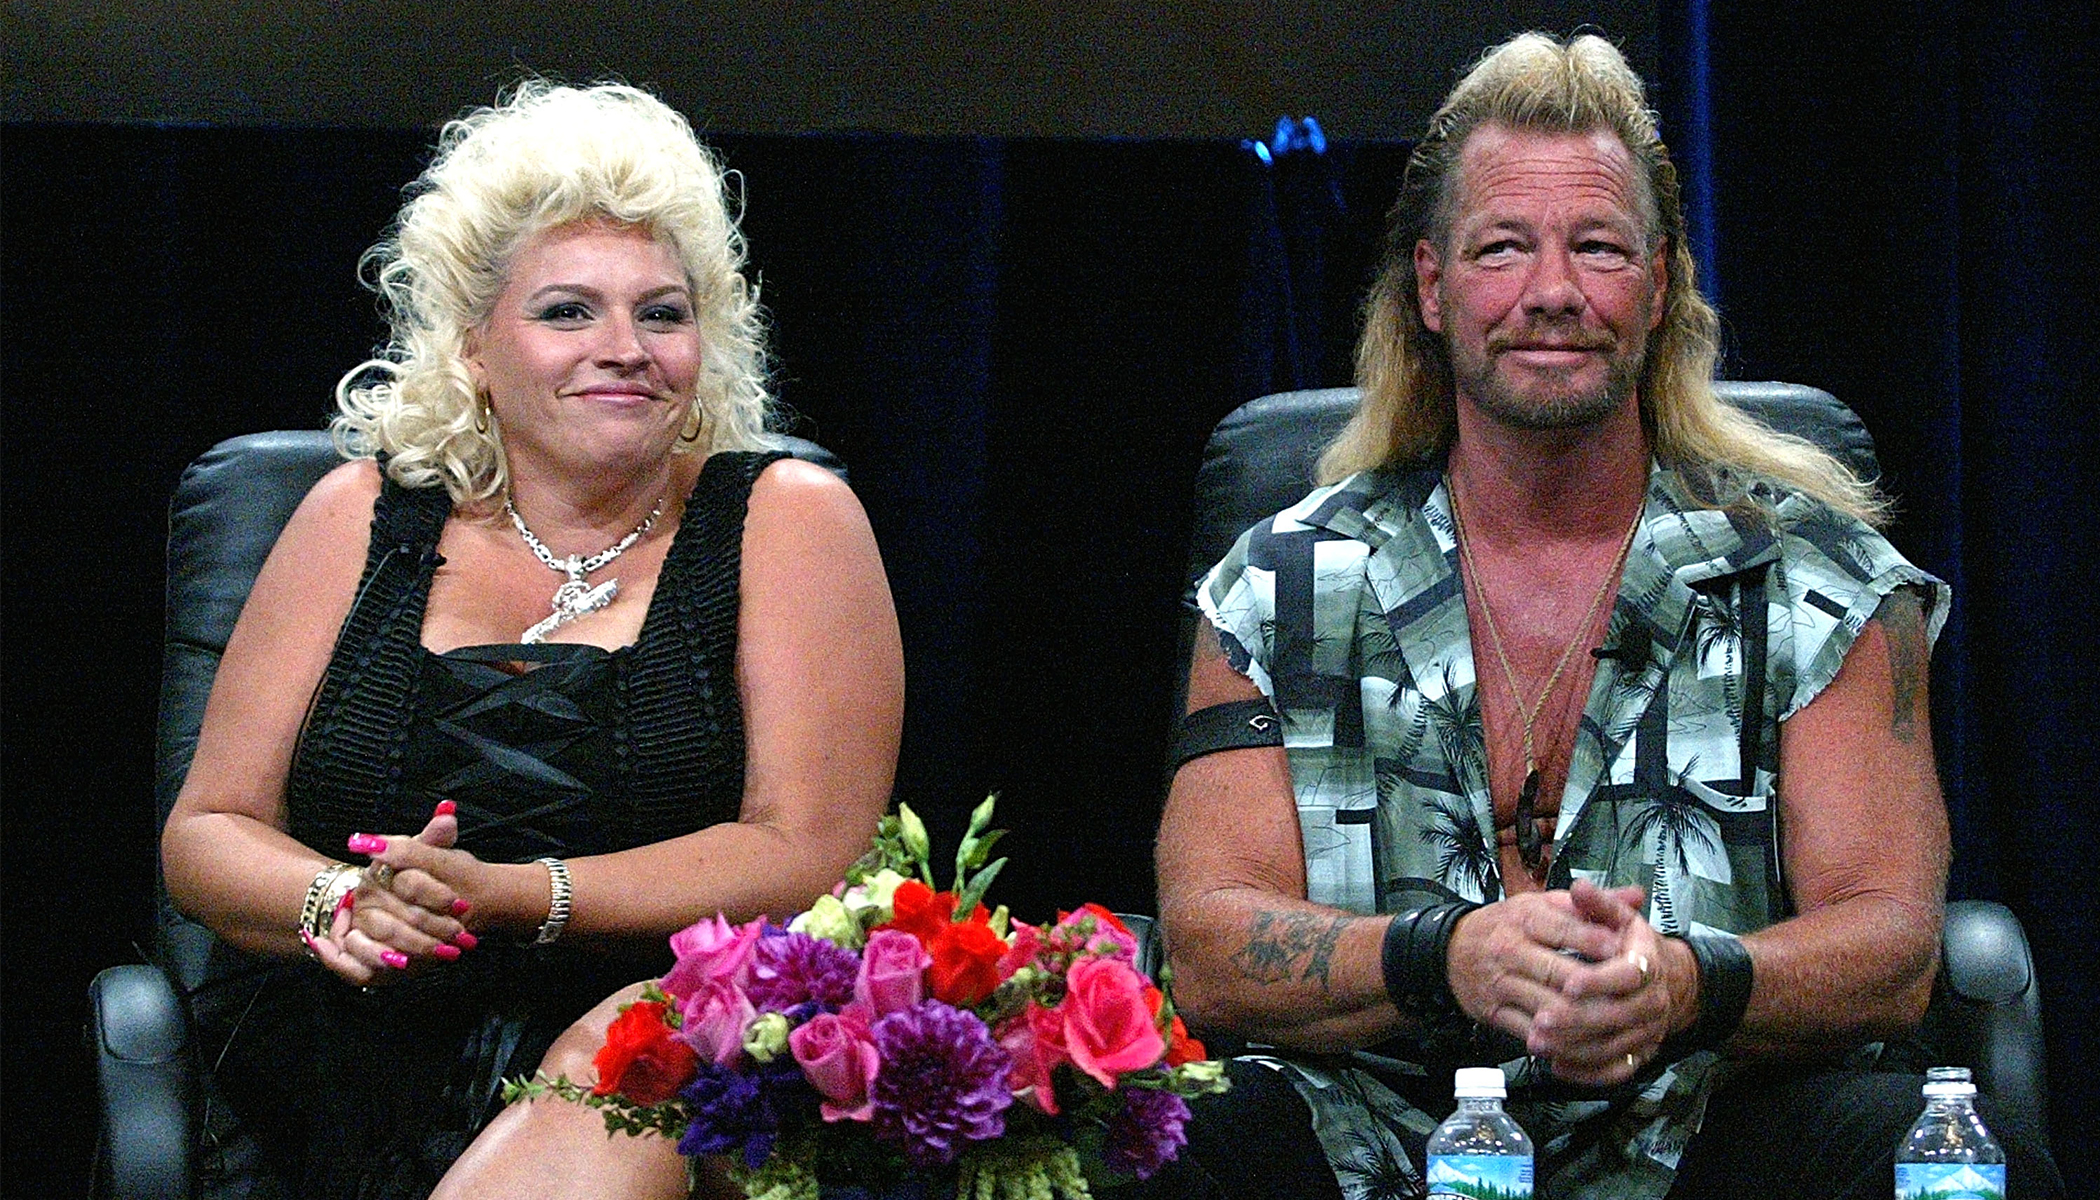 ‘Dog the Bounty Hunter’ Says Wife Told Him ‘Let Me Go’ Before Death2100 x 1200